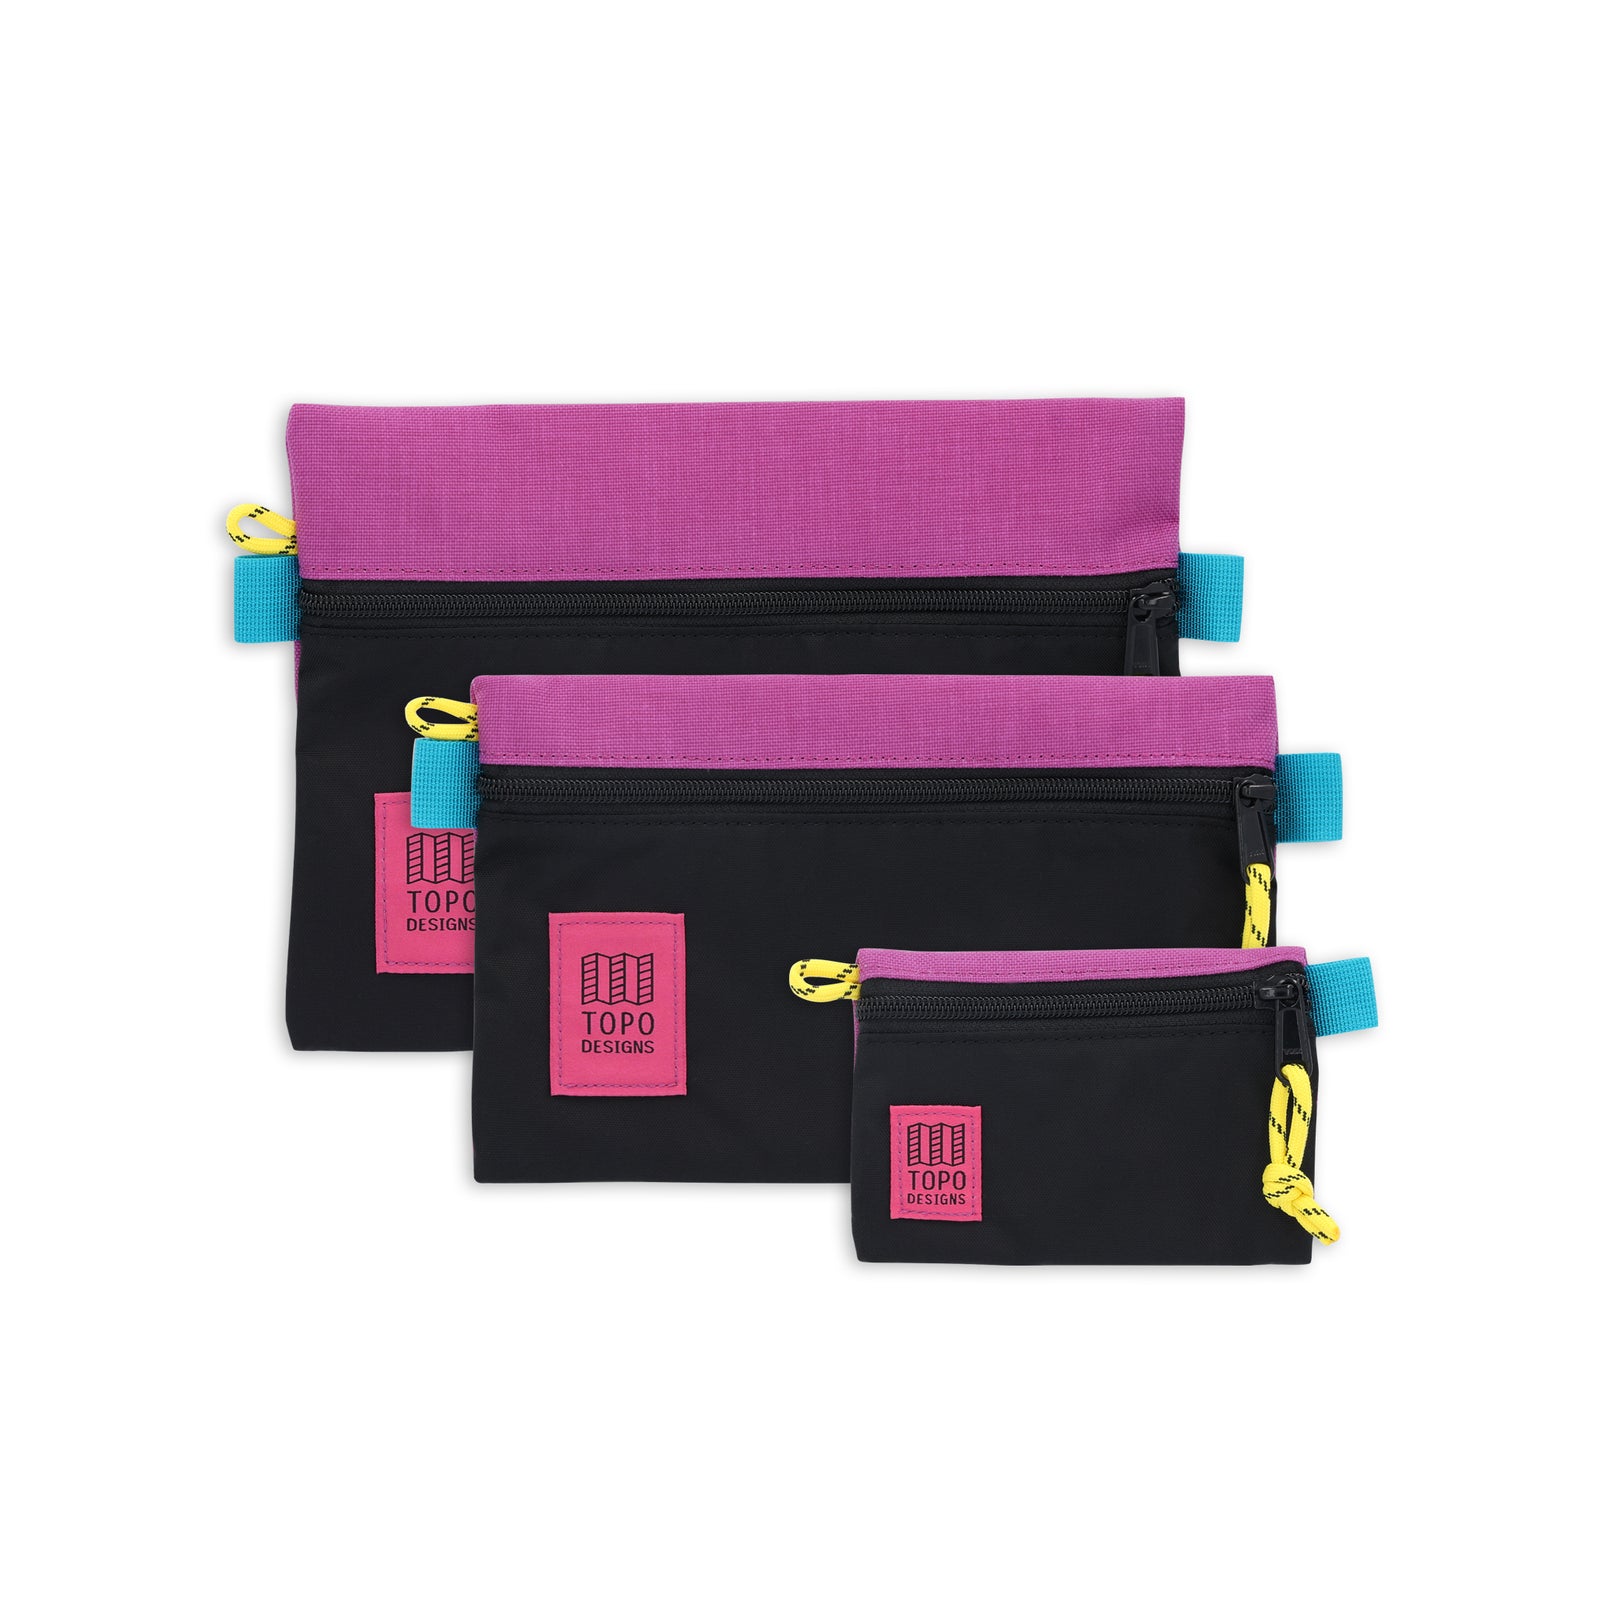 Topo Designs Accessory Bags - product shot of the "Medium", "Small", and "Micro" accessory bags in "Black / Grape - Recycled" purple nylon.